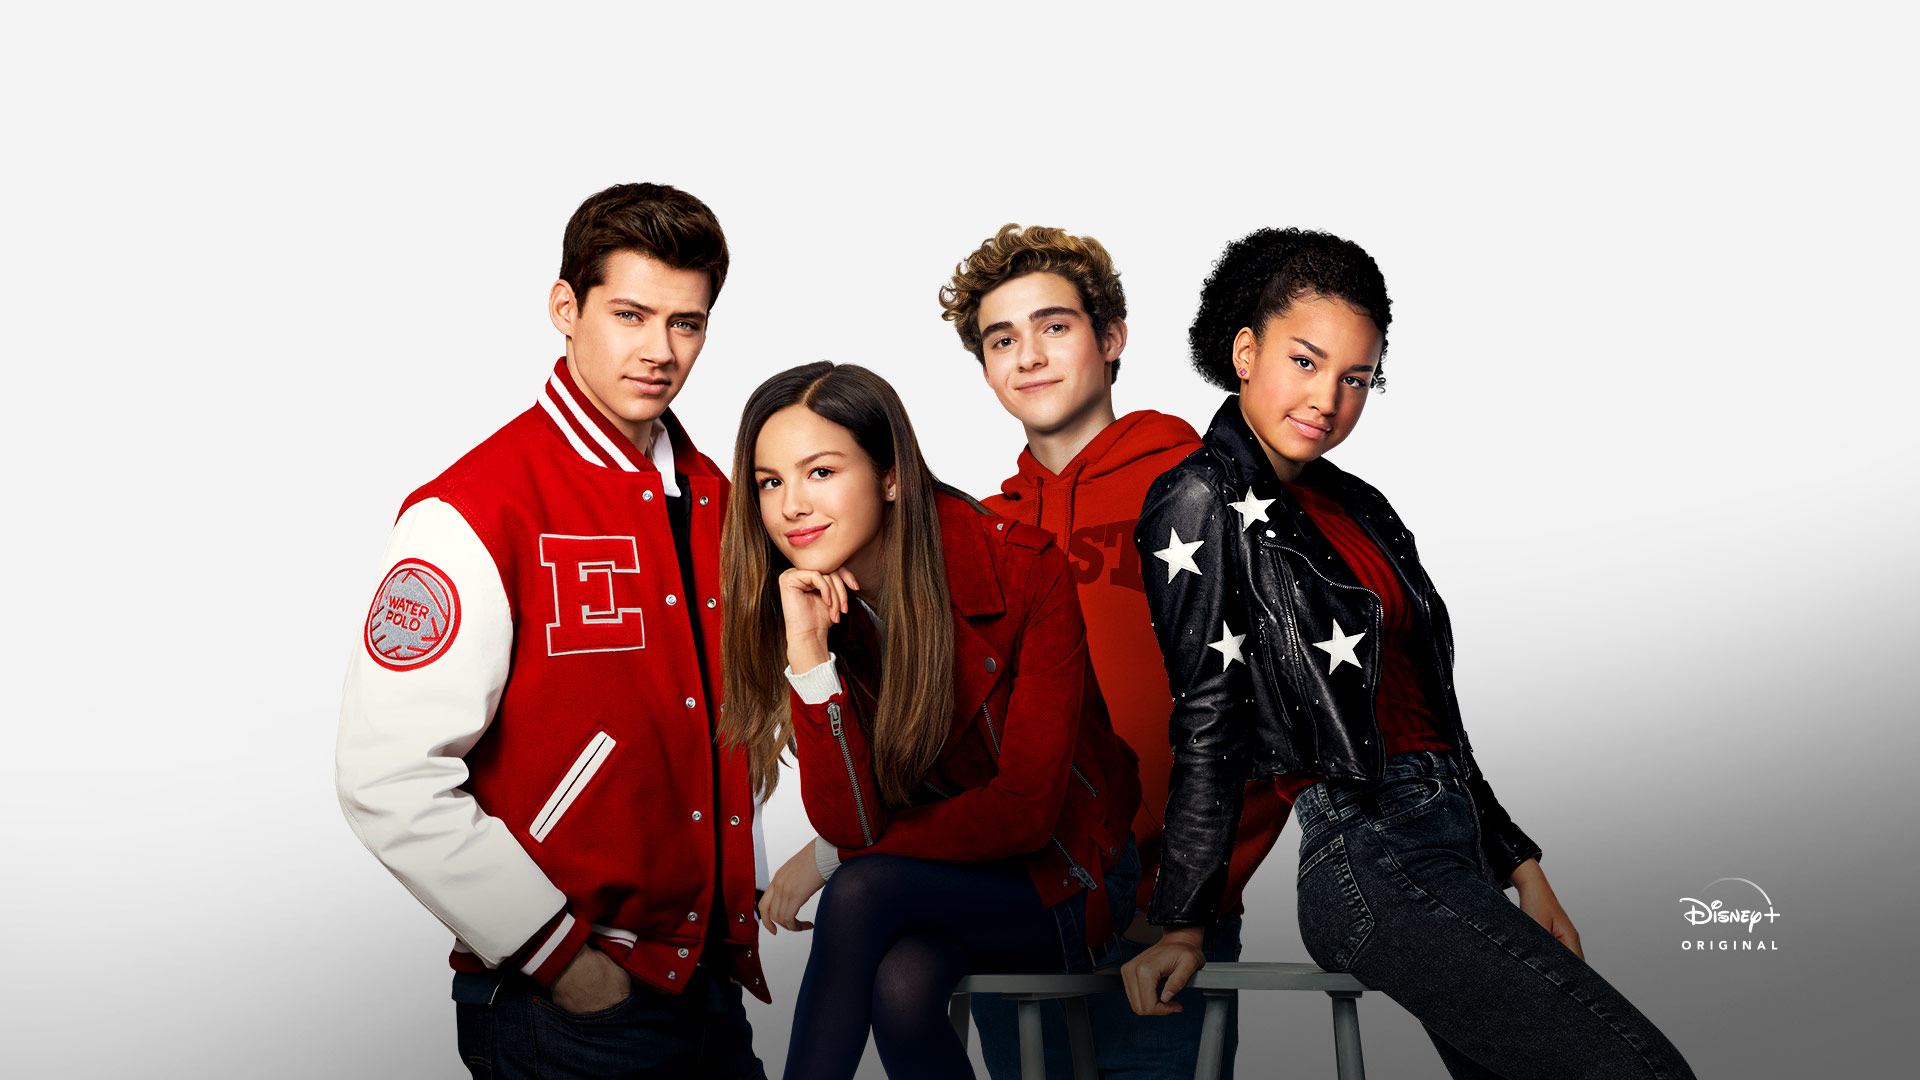 Watch High School Musical: The Musical: The Series